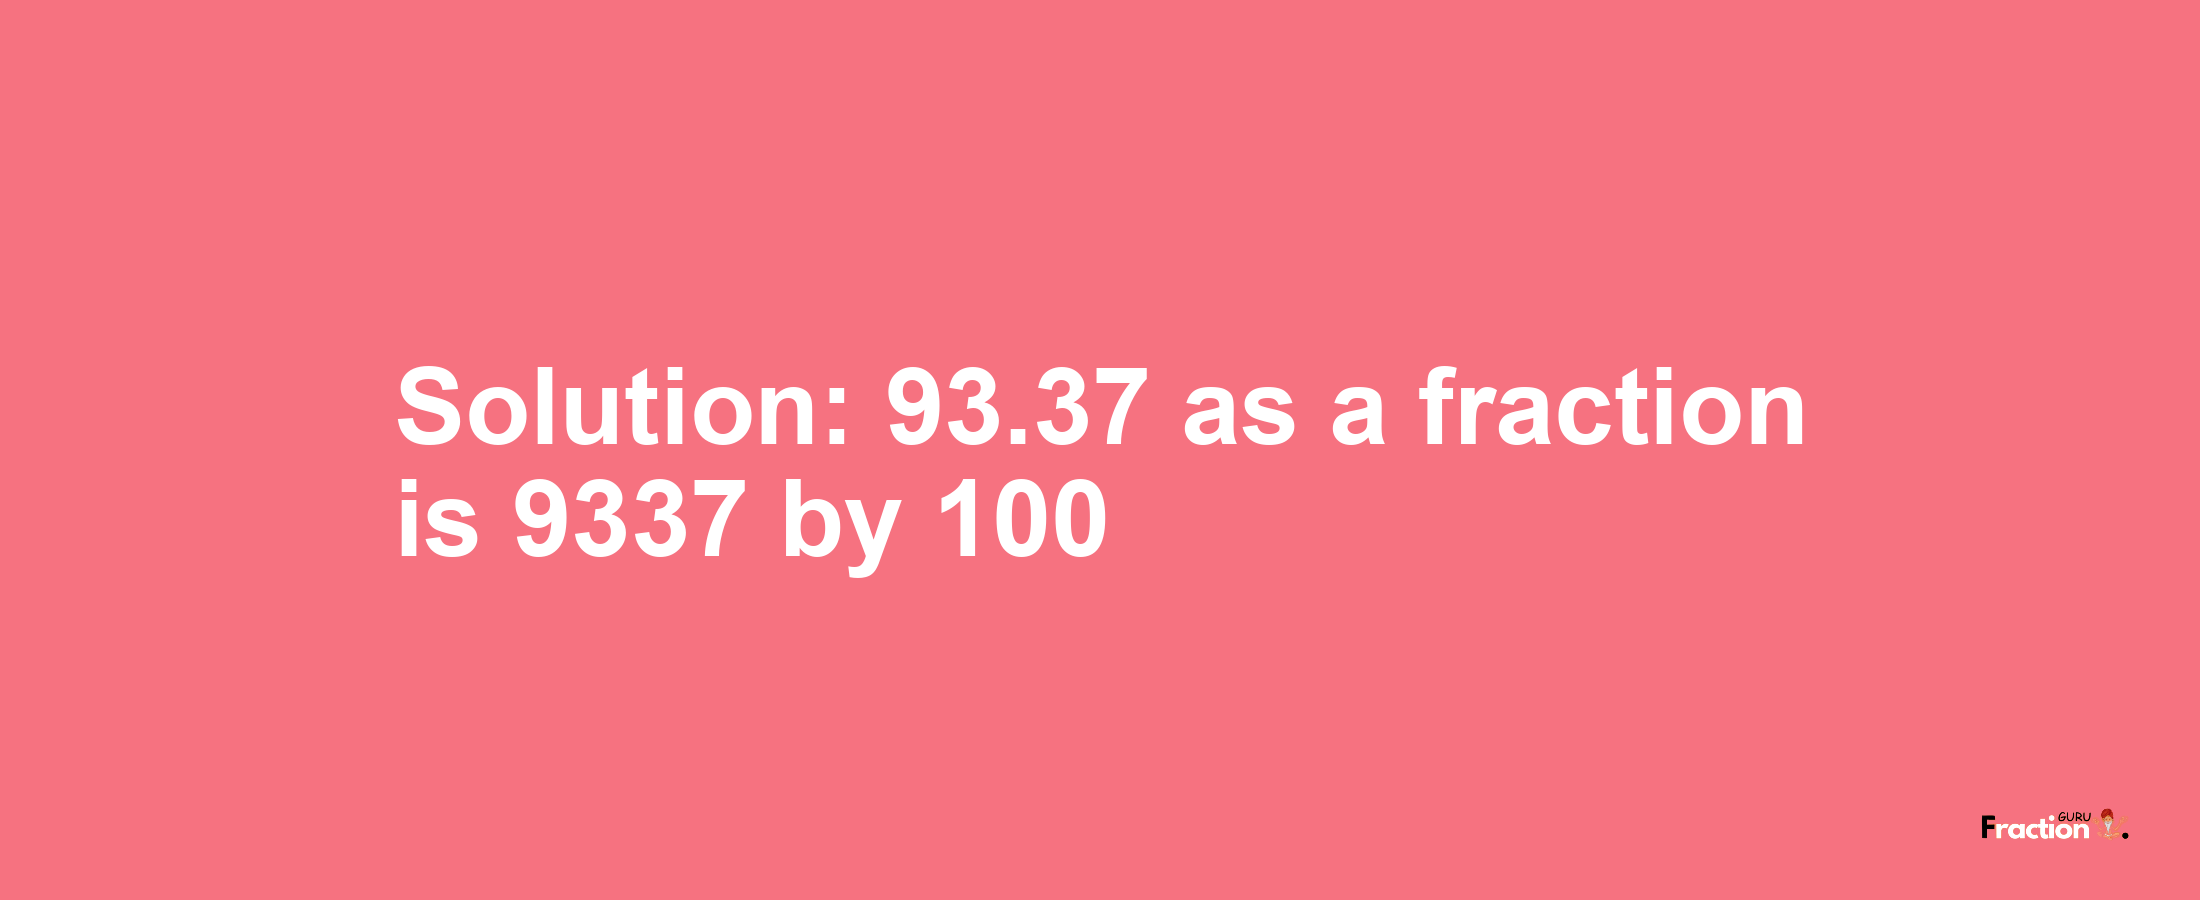 Solution:93.37 as a fraction is 9337/100